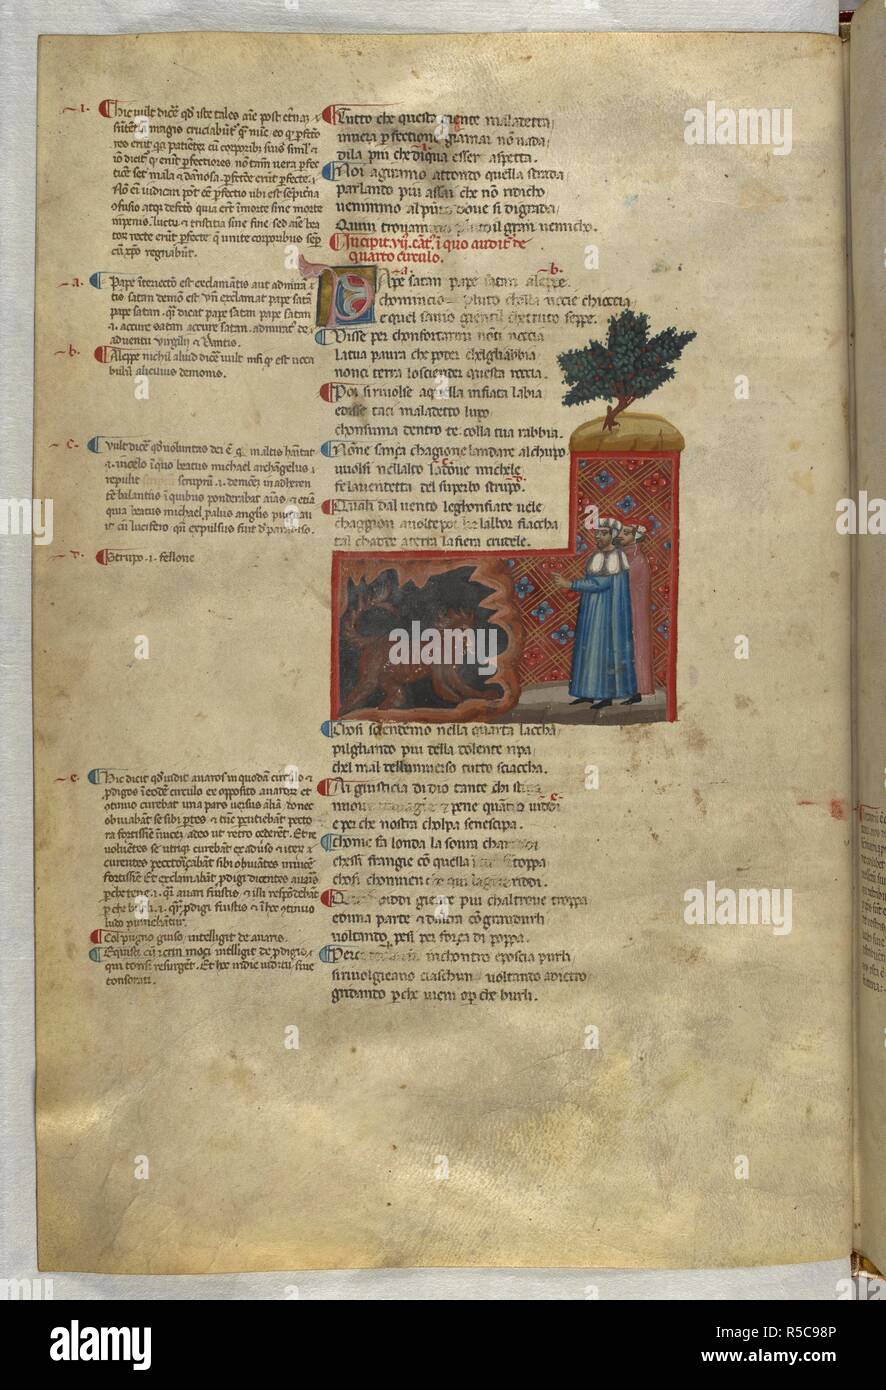 Inferno: Pluto in the form of a wolf. Dante Alighieri, Divina Commedia ( The Divine Comedy ), with a commentary in Latin. 1st half of the 14th century. Source: Egerton 943, f.13v. Language: Italian, Latin. Stock Photo